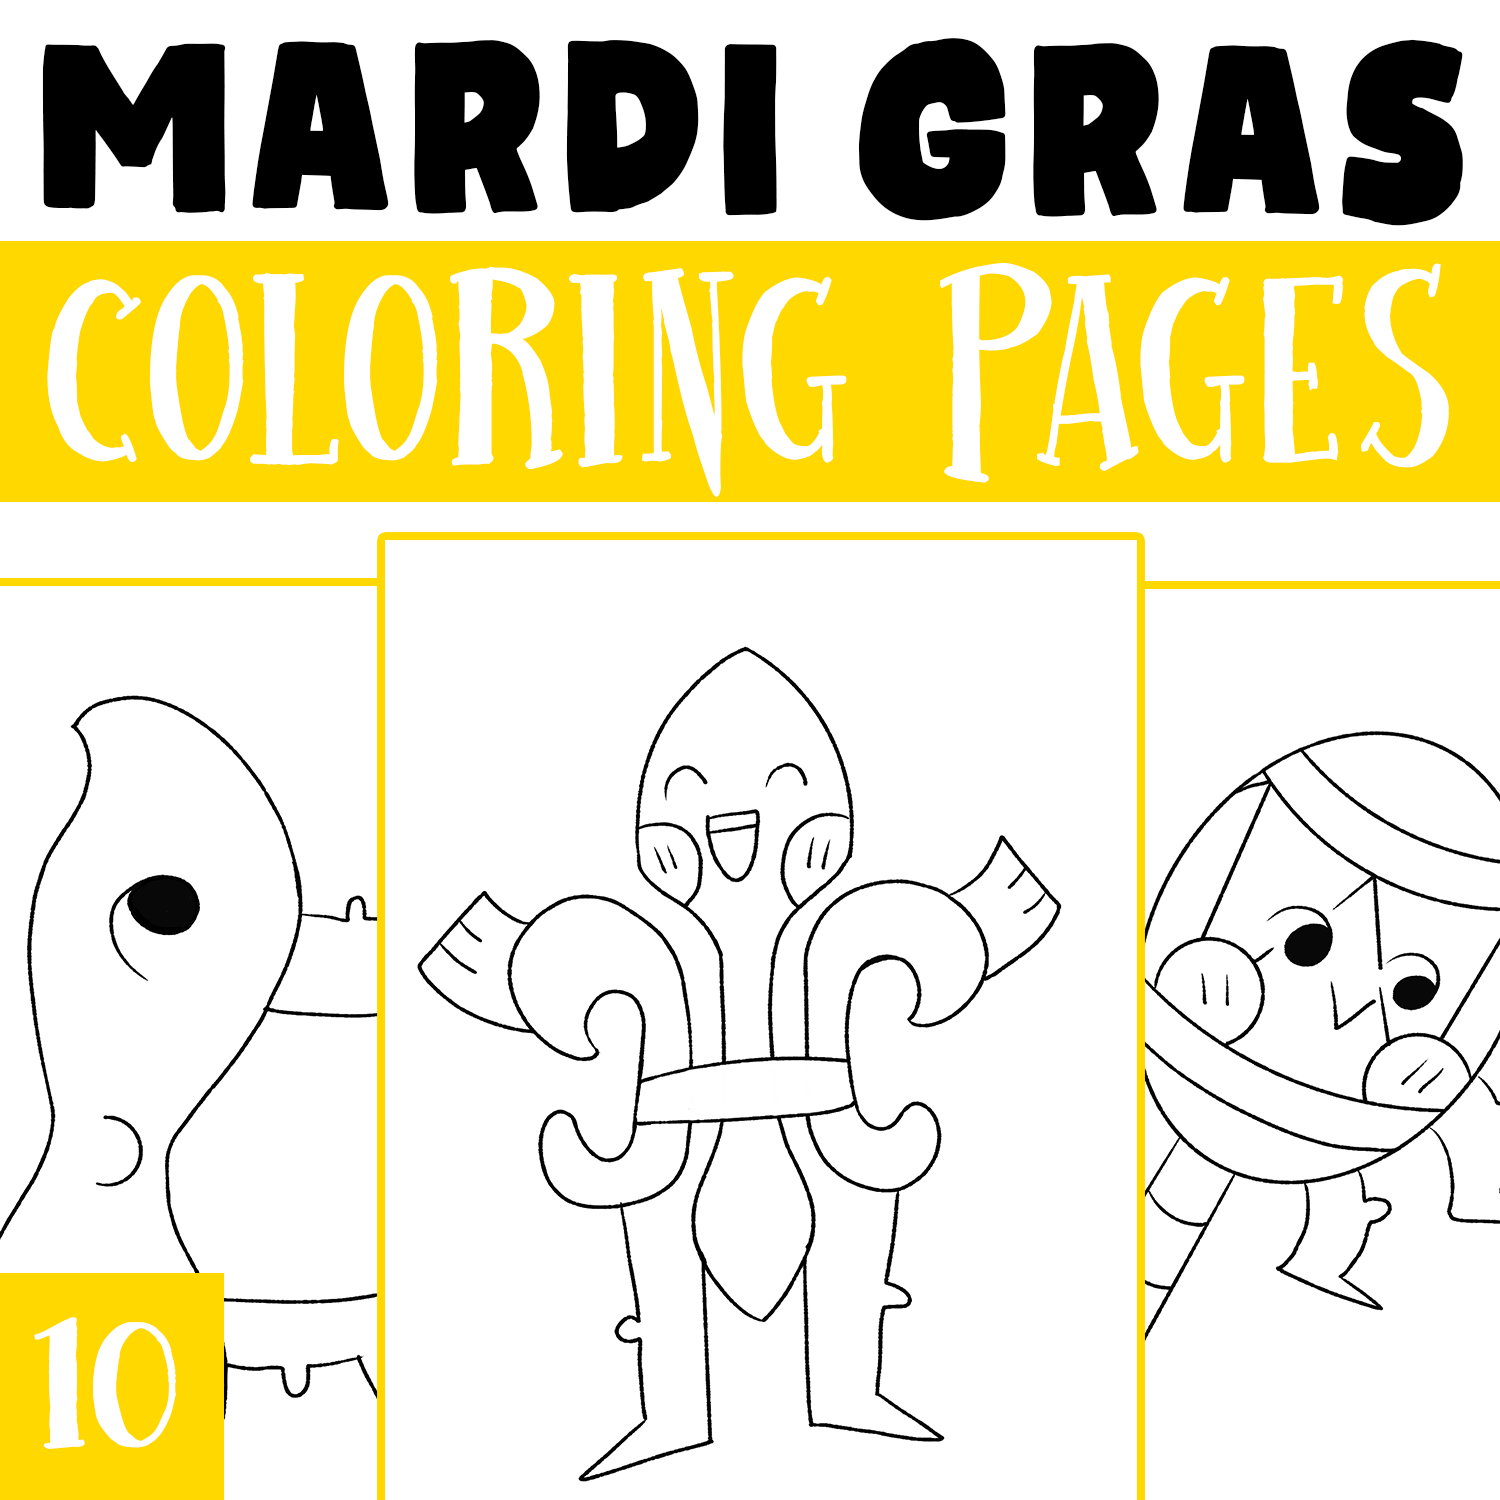 Mardi gras coloring pages fat tuesday coloring sheets activity morning work made by teachers